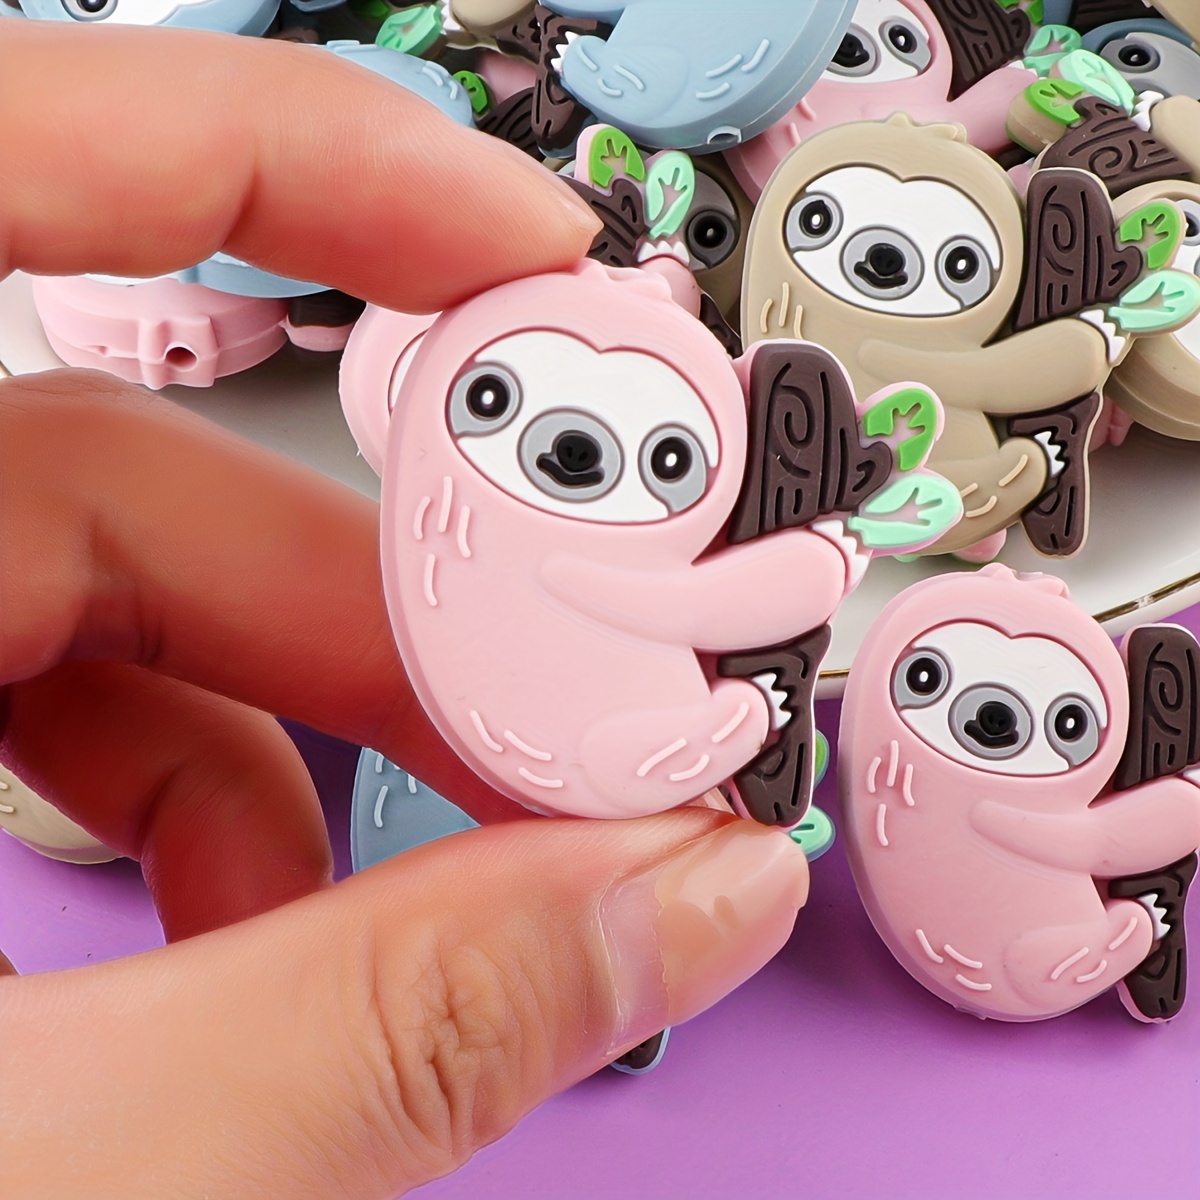 

6pcs Sloth Silicone Beads, Diy Jewelry Making Kit For Creative Crafts, Bead Pens, Phone Charms & Bag Accessories